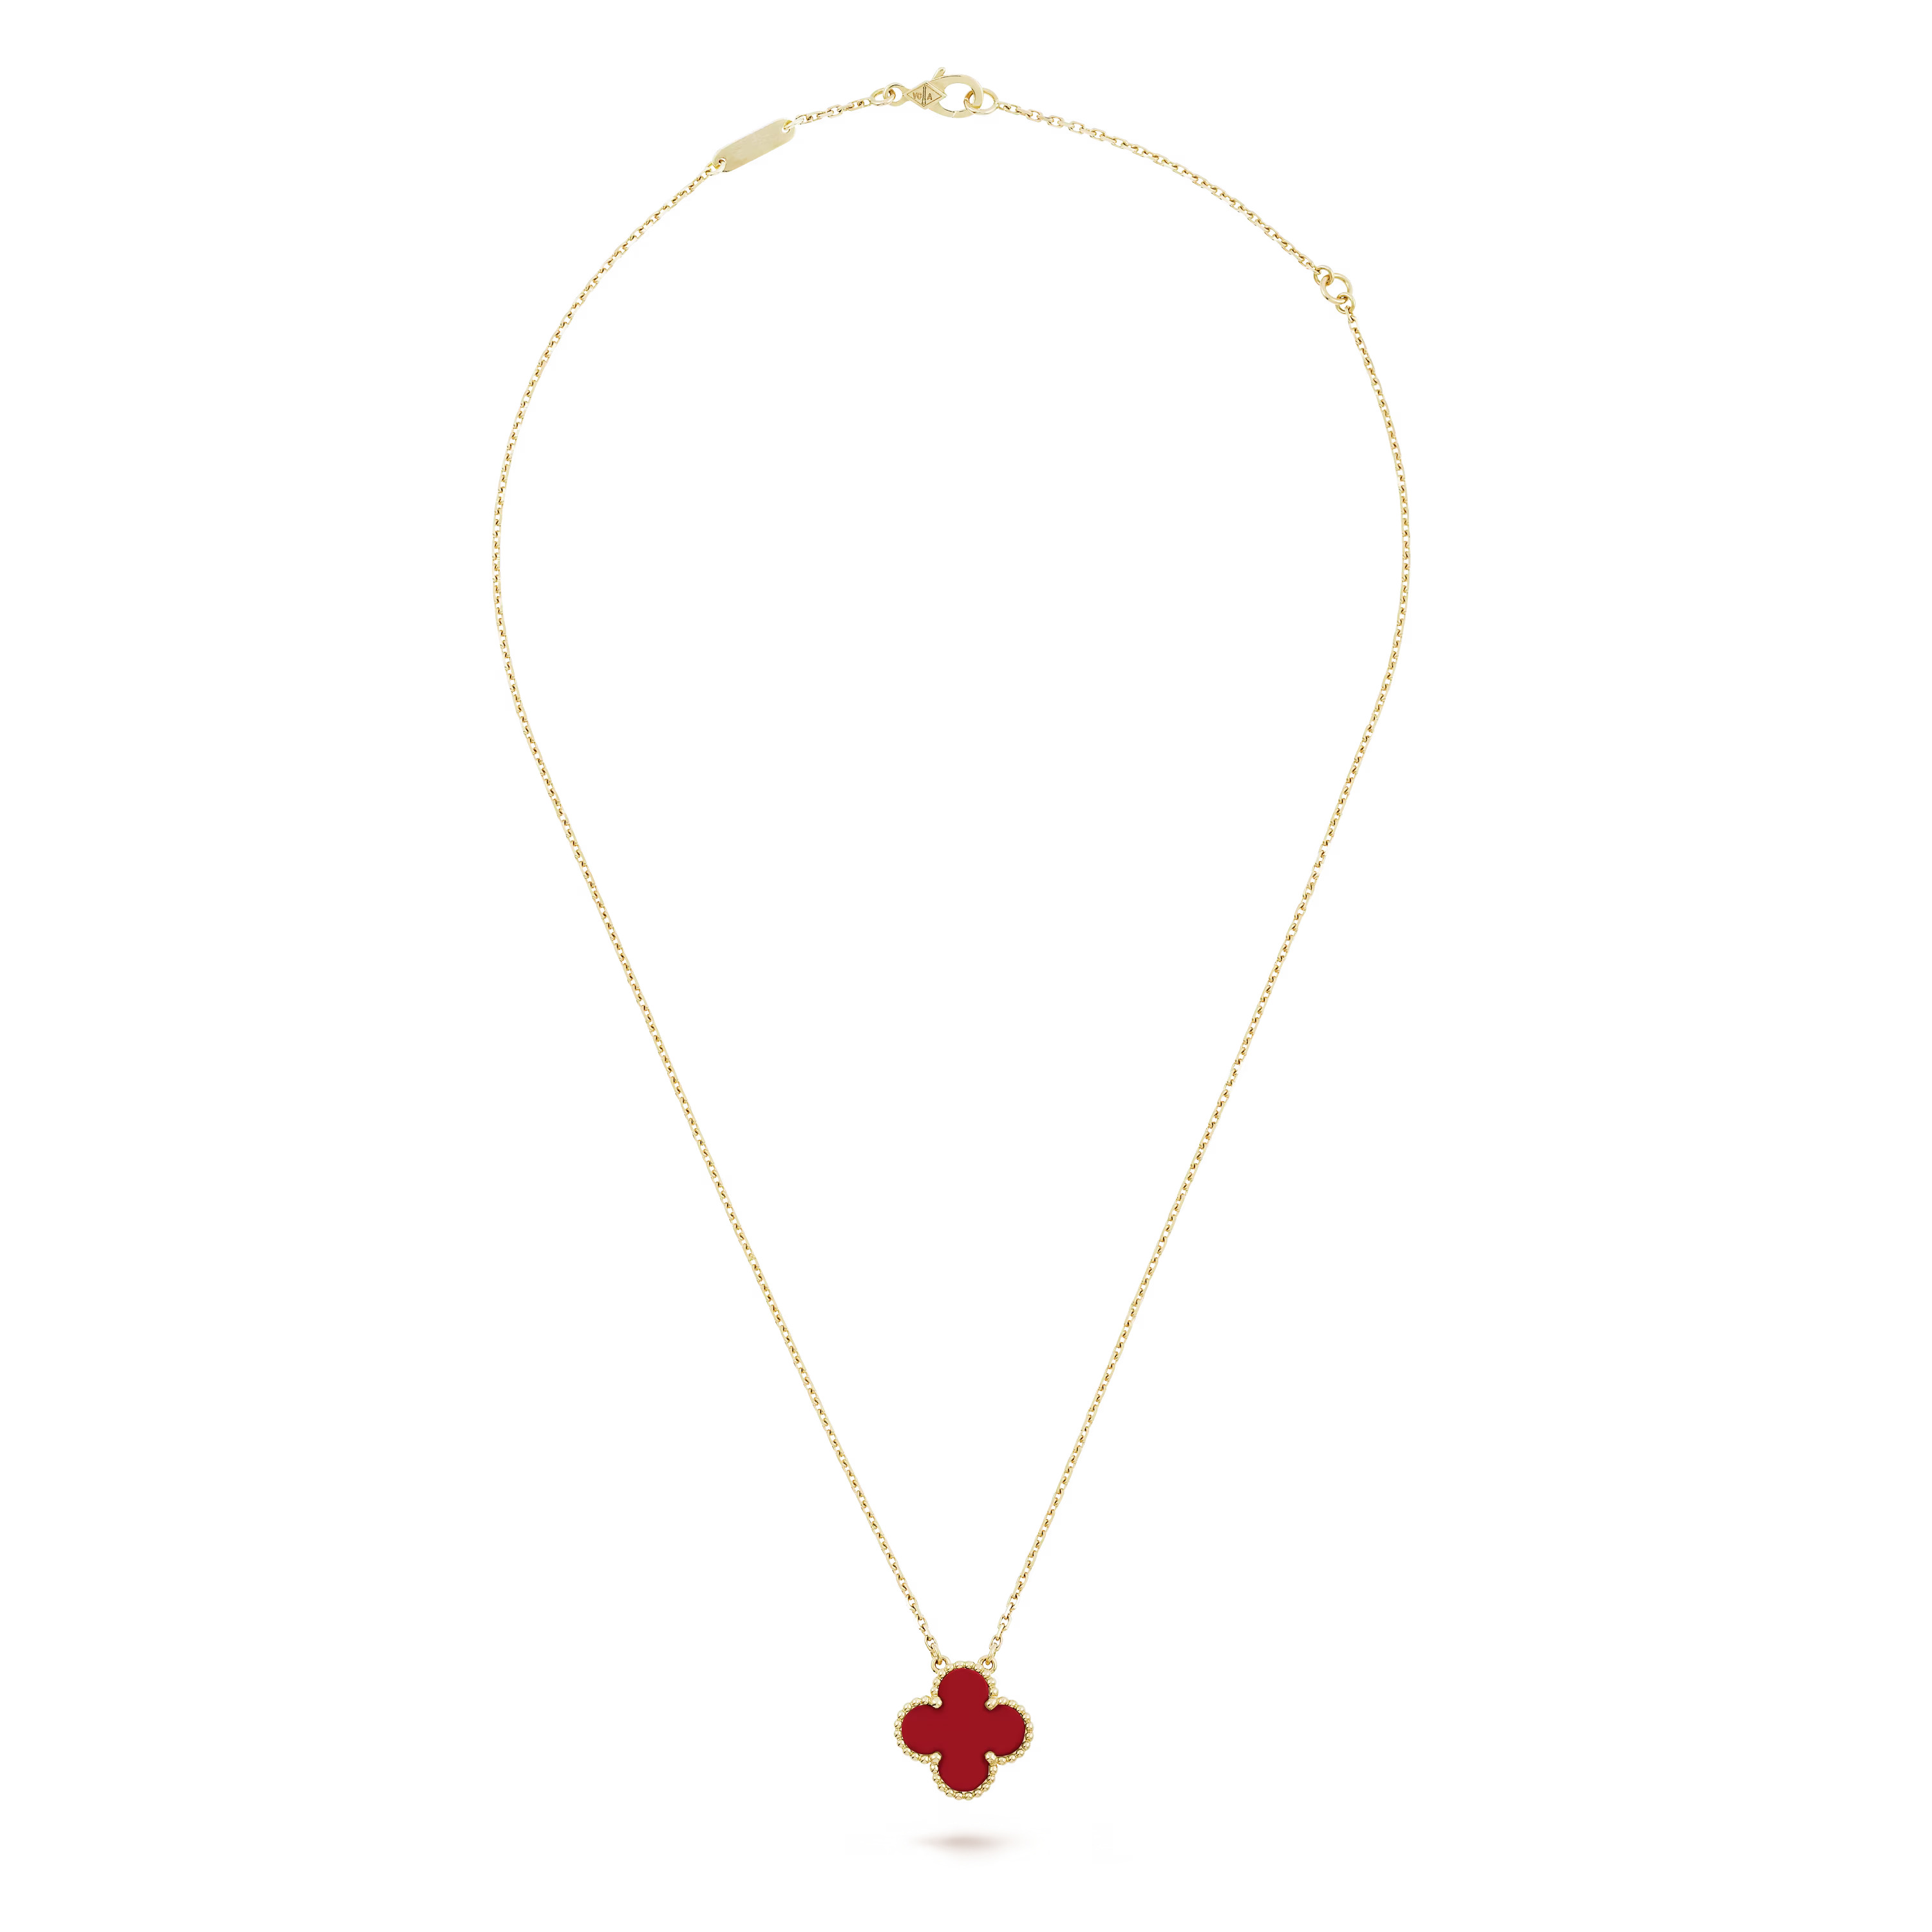 DÂY CHUYỀN VAN CLEEF & ARPELS VINTAGE ALHAMBRA NECKLACE PENDANT IN GOLD CARNELIAN VCARD38500 2